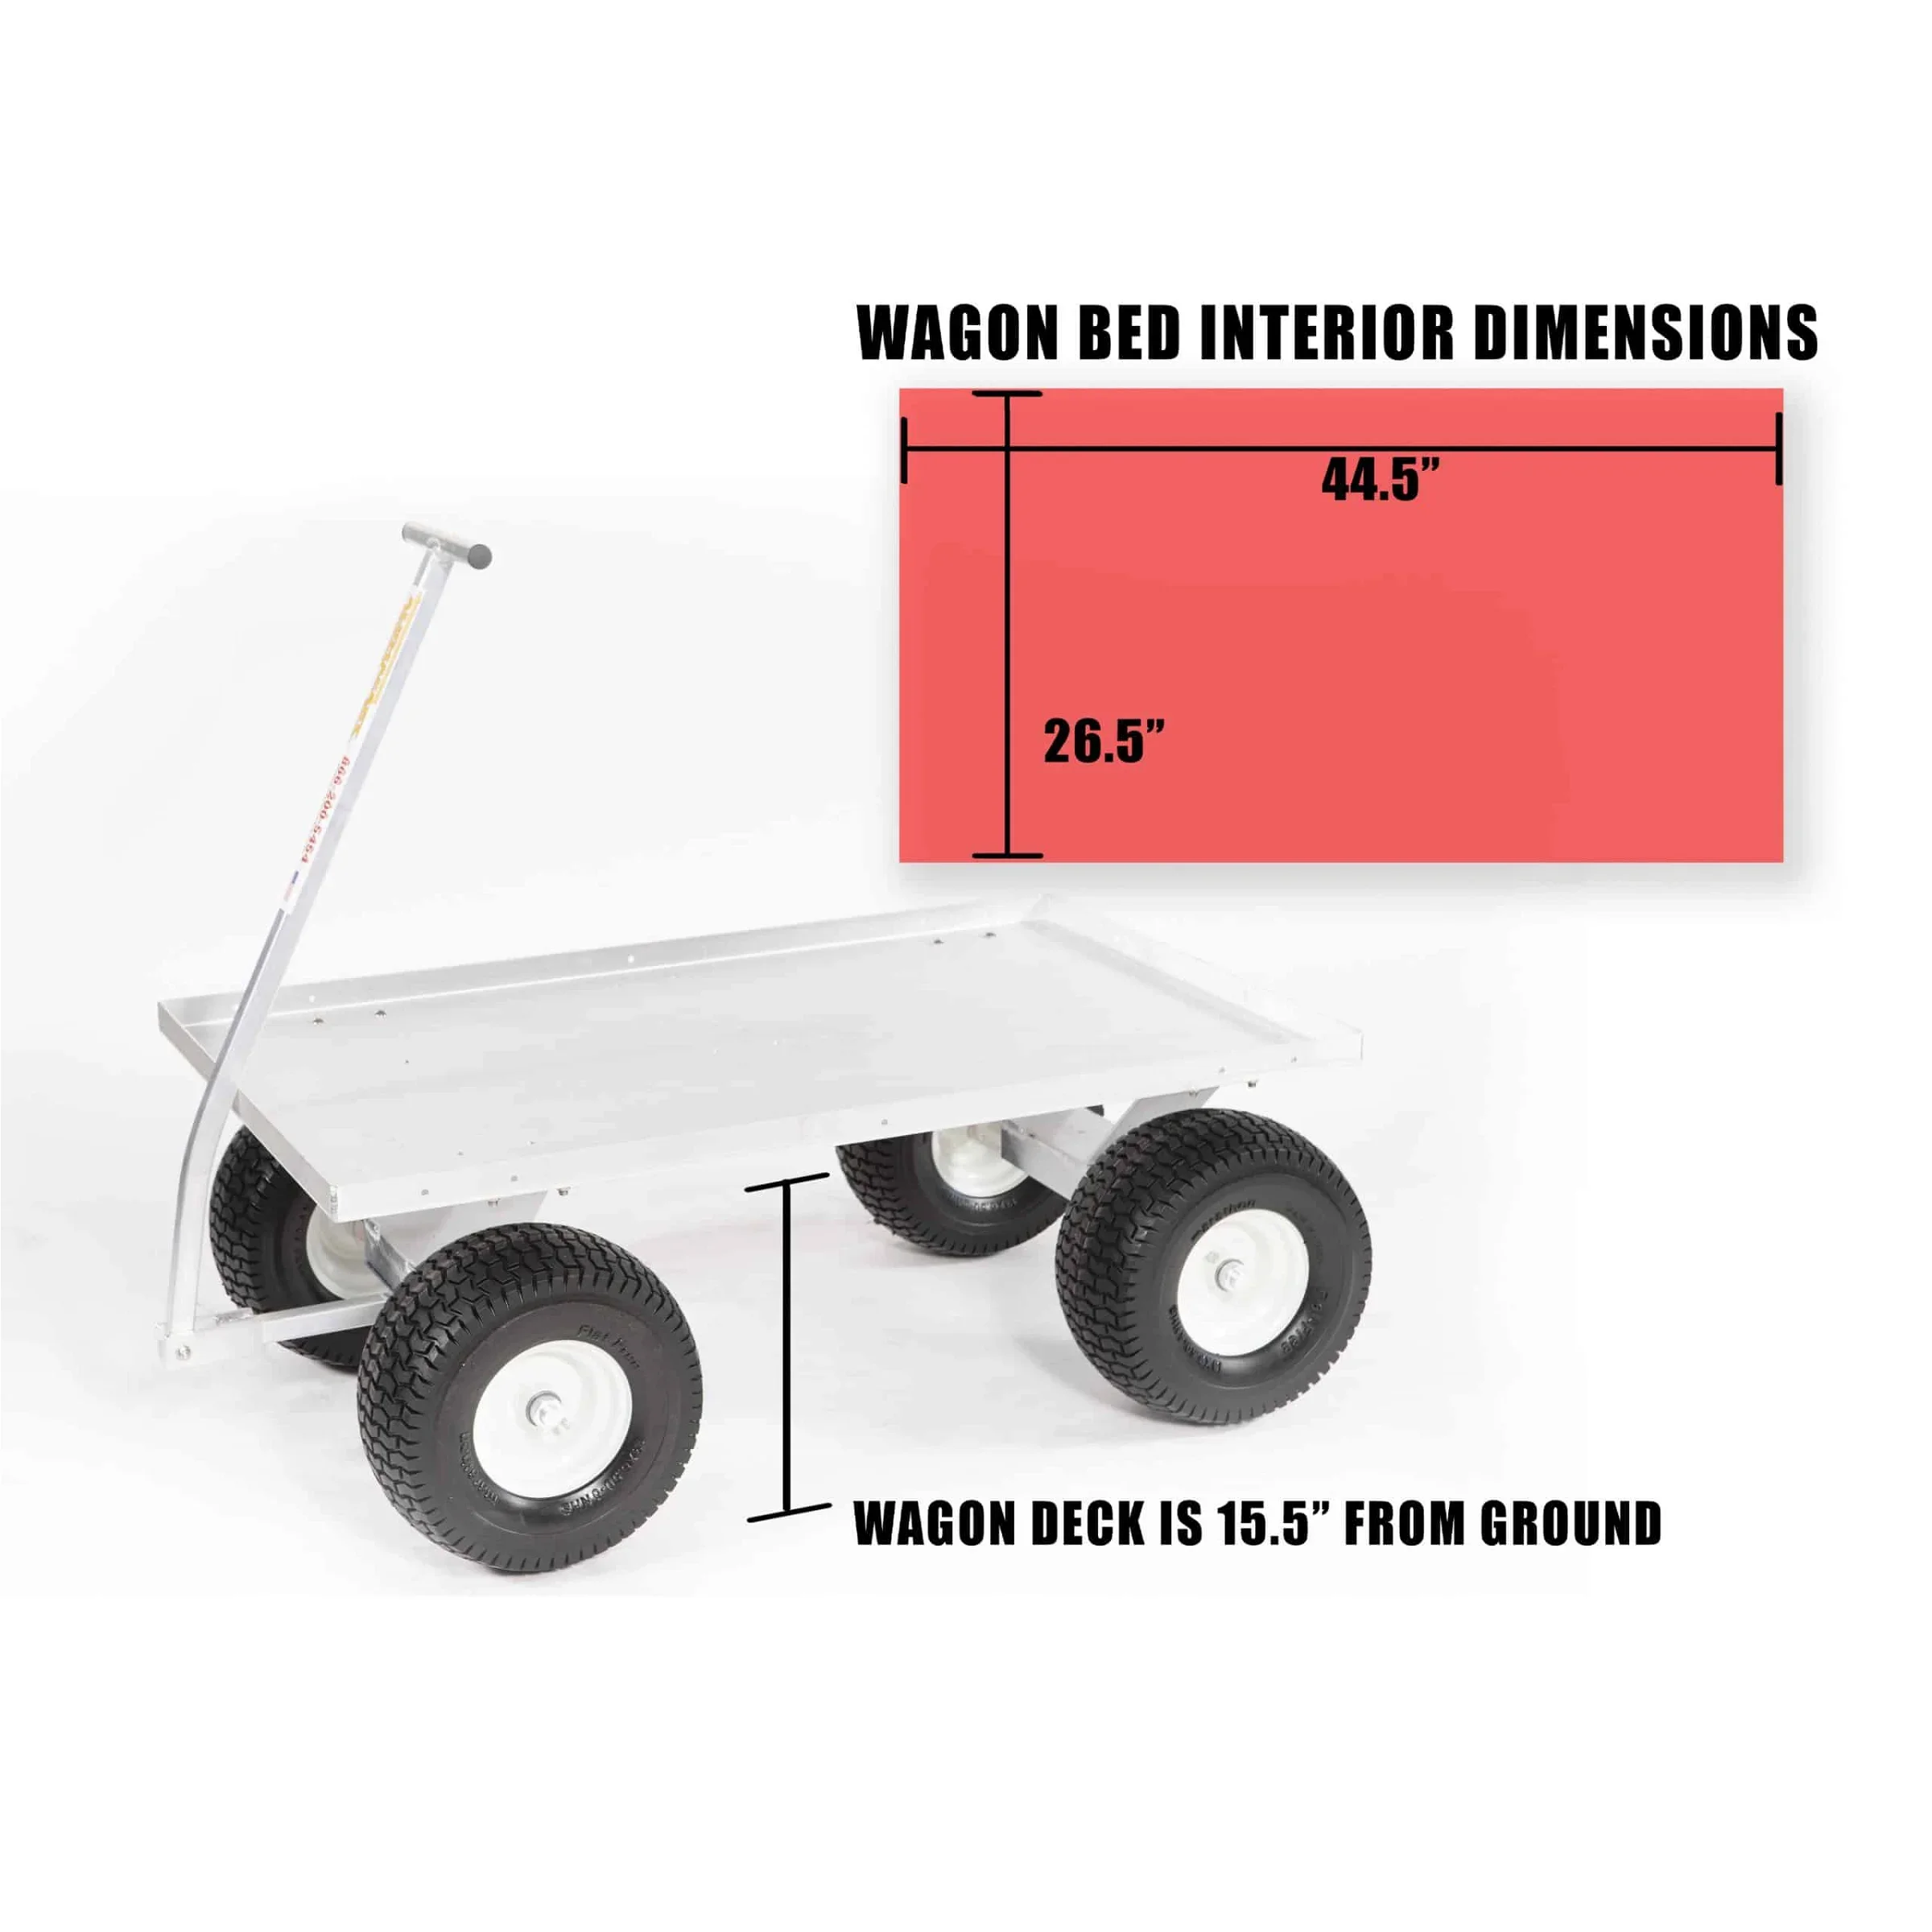 A Kahuna Wagon Heavy Duty Jupiter Pull Wagon dimensions reference image.